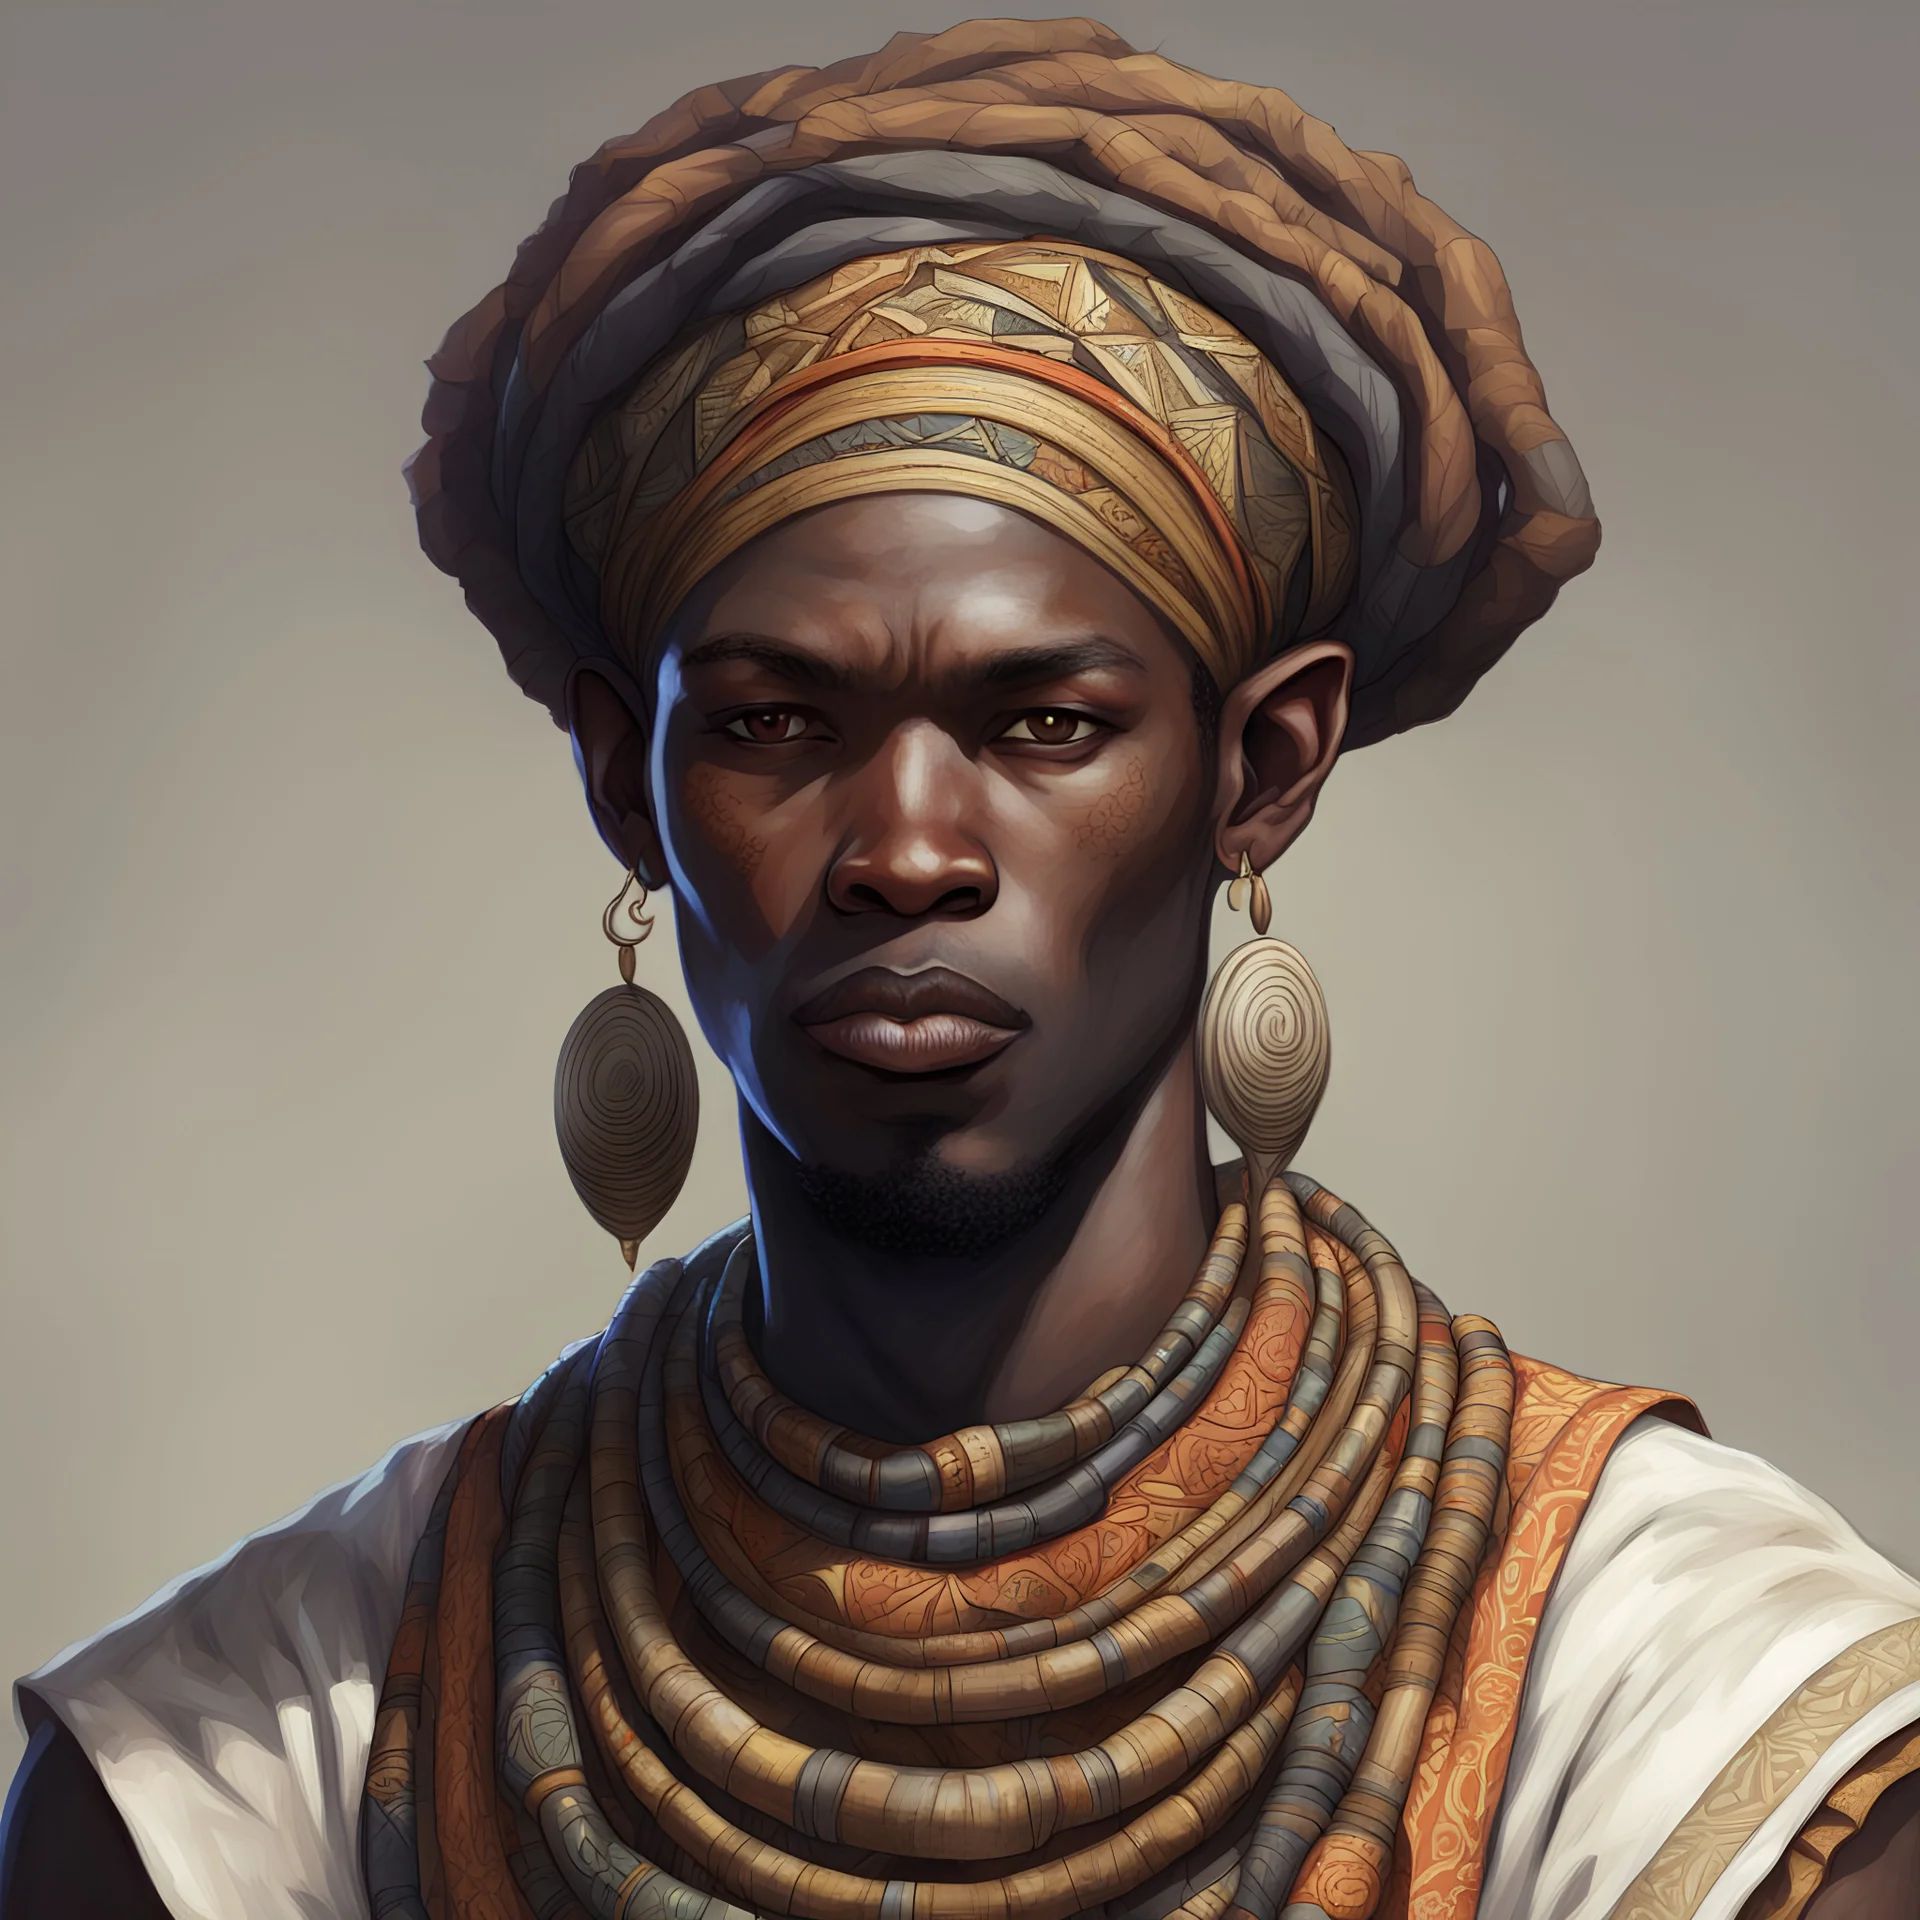 dnd, portrait of negroid in ethnic african clothes